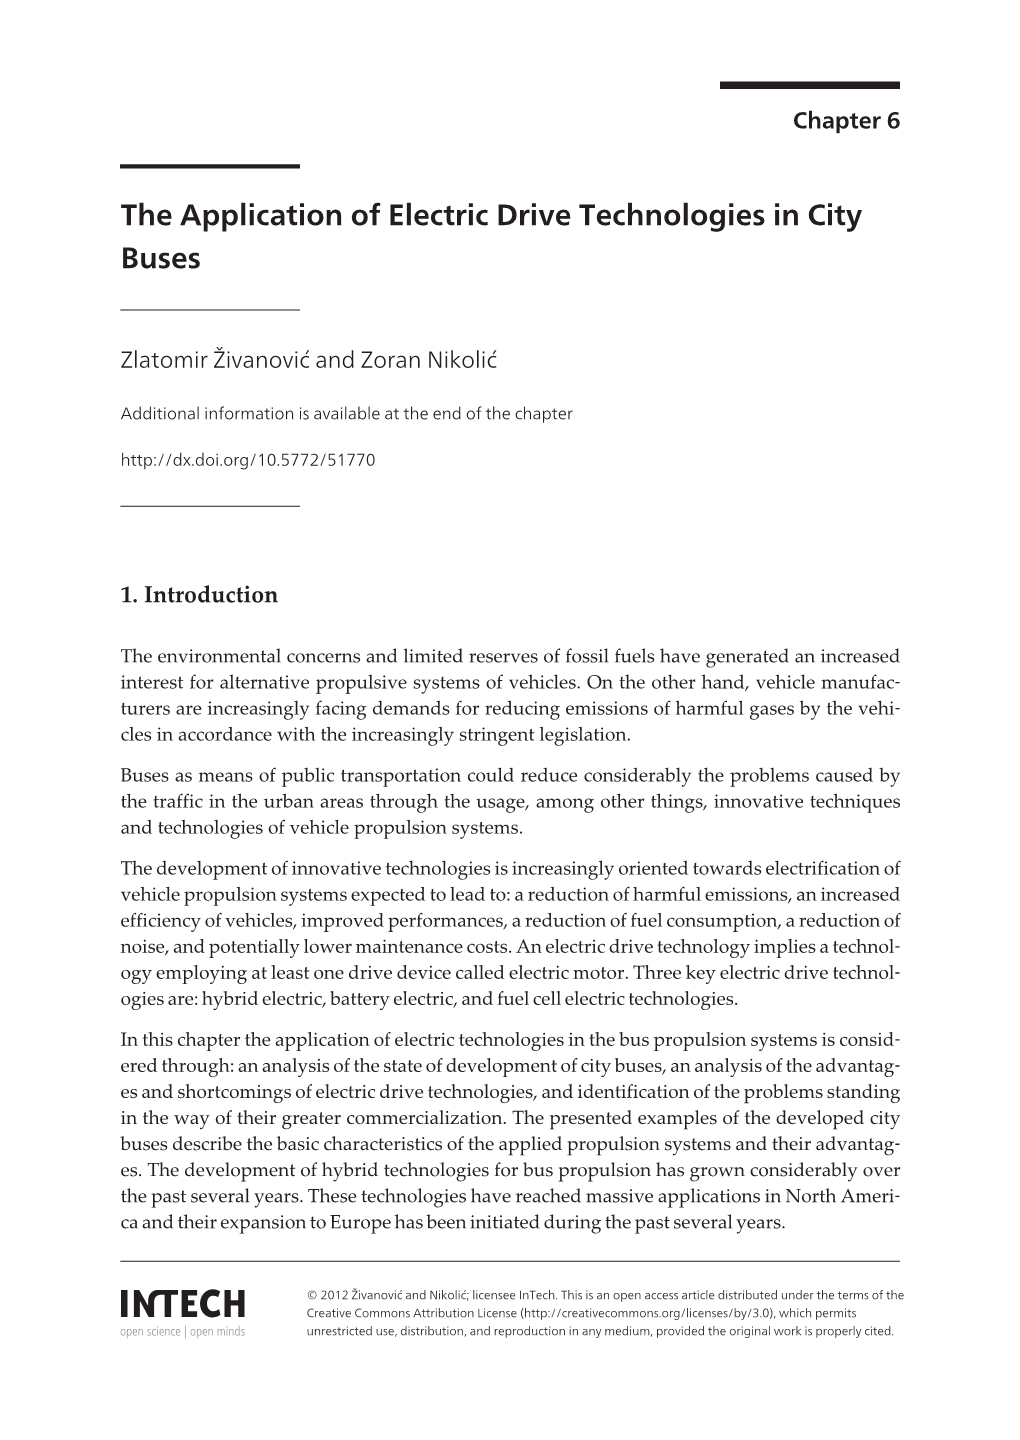 The Application of Electric Drive Technologies in City Buses